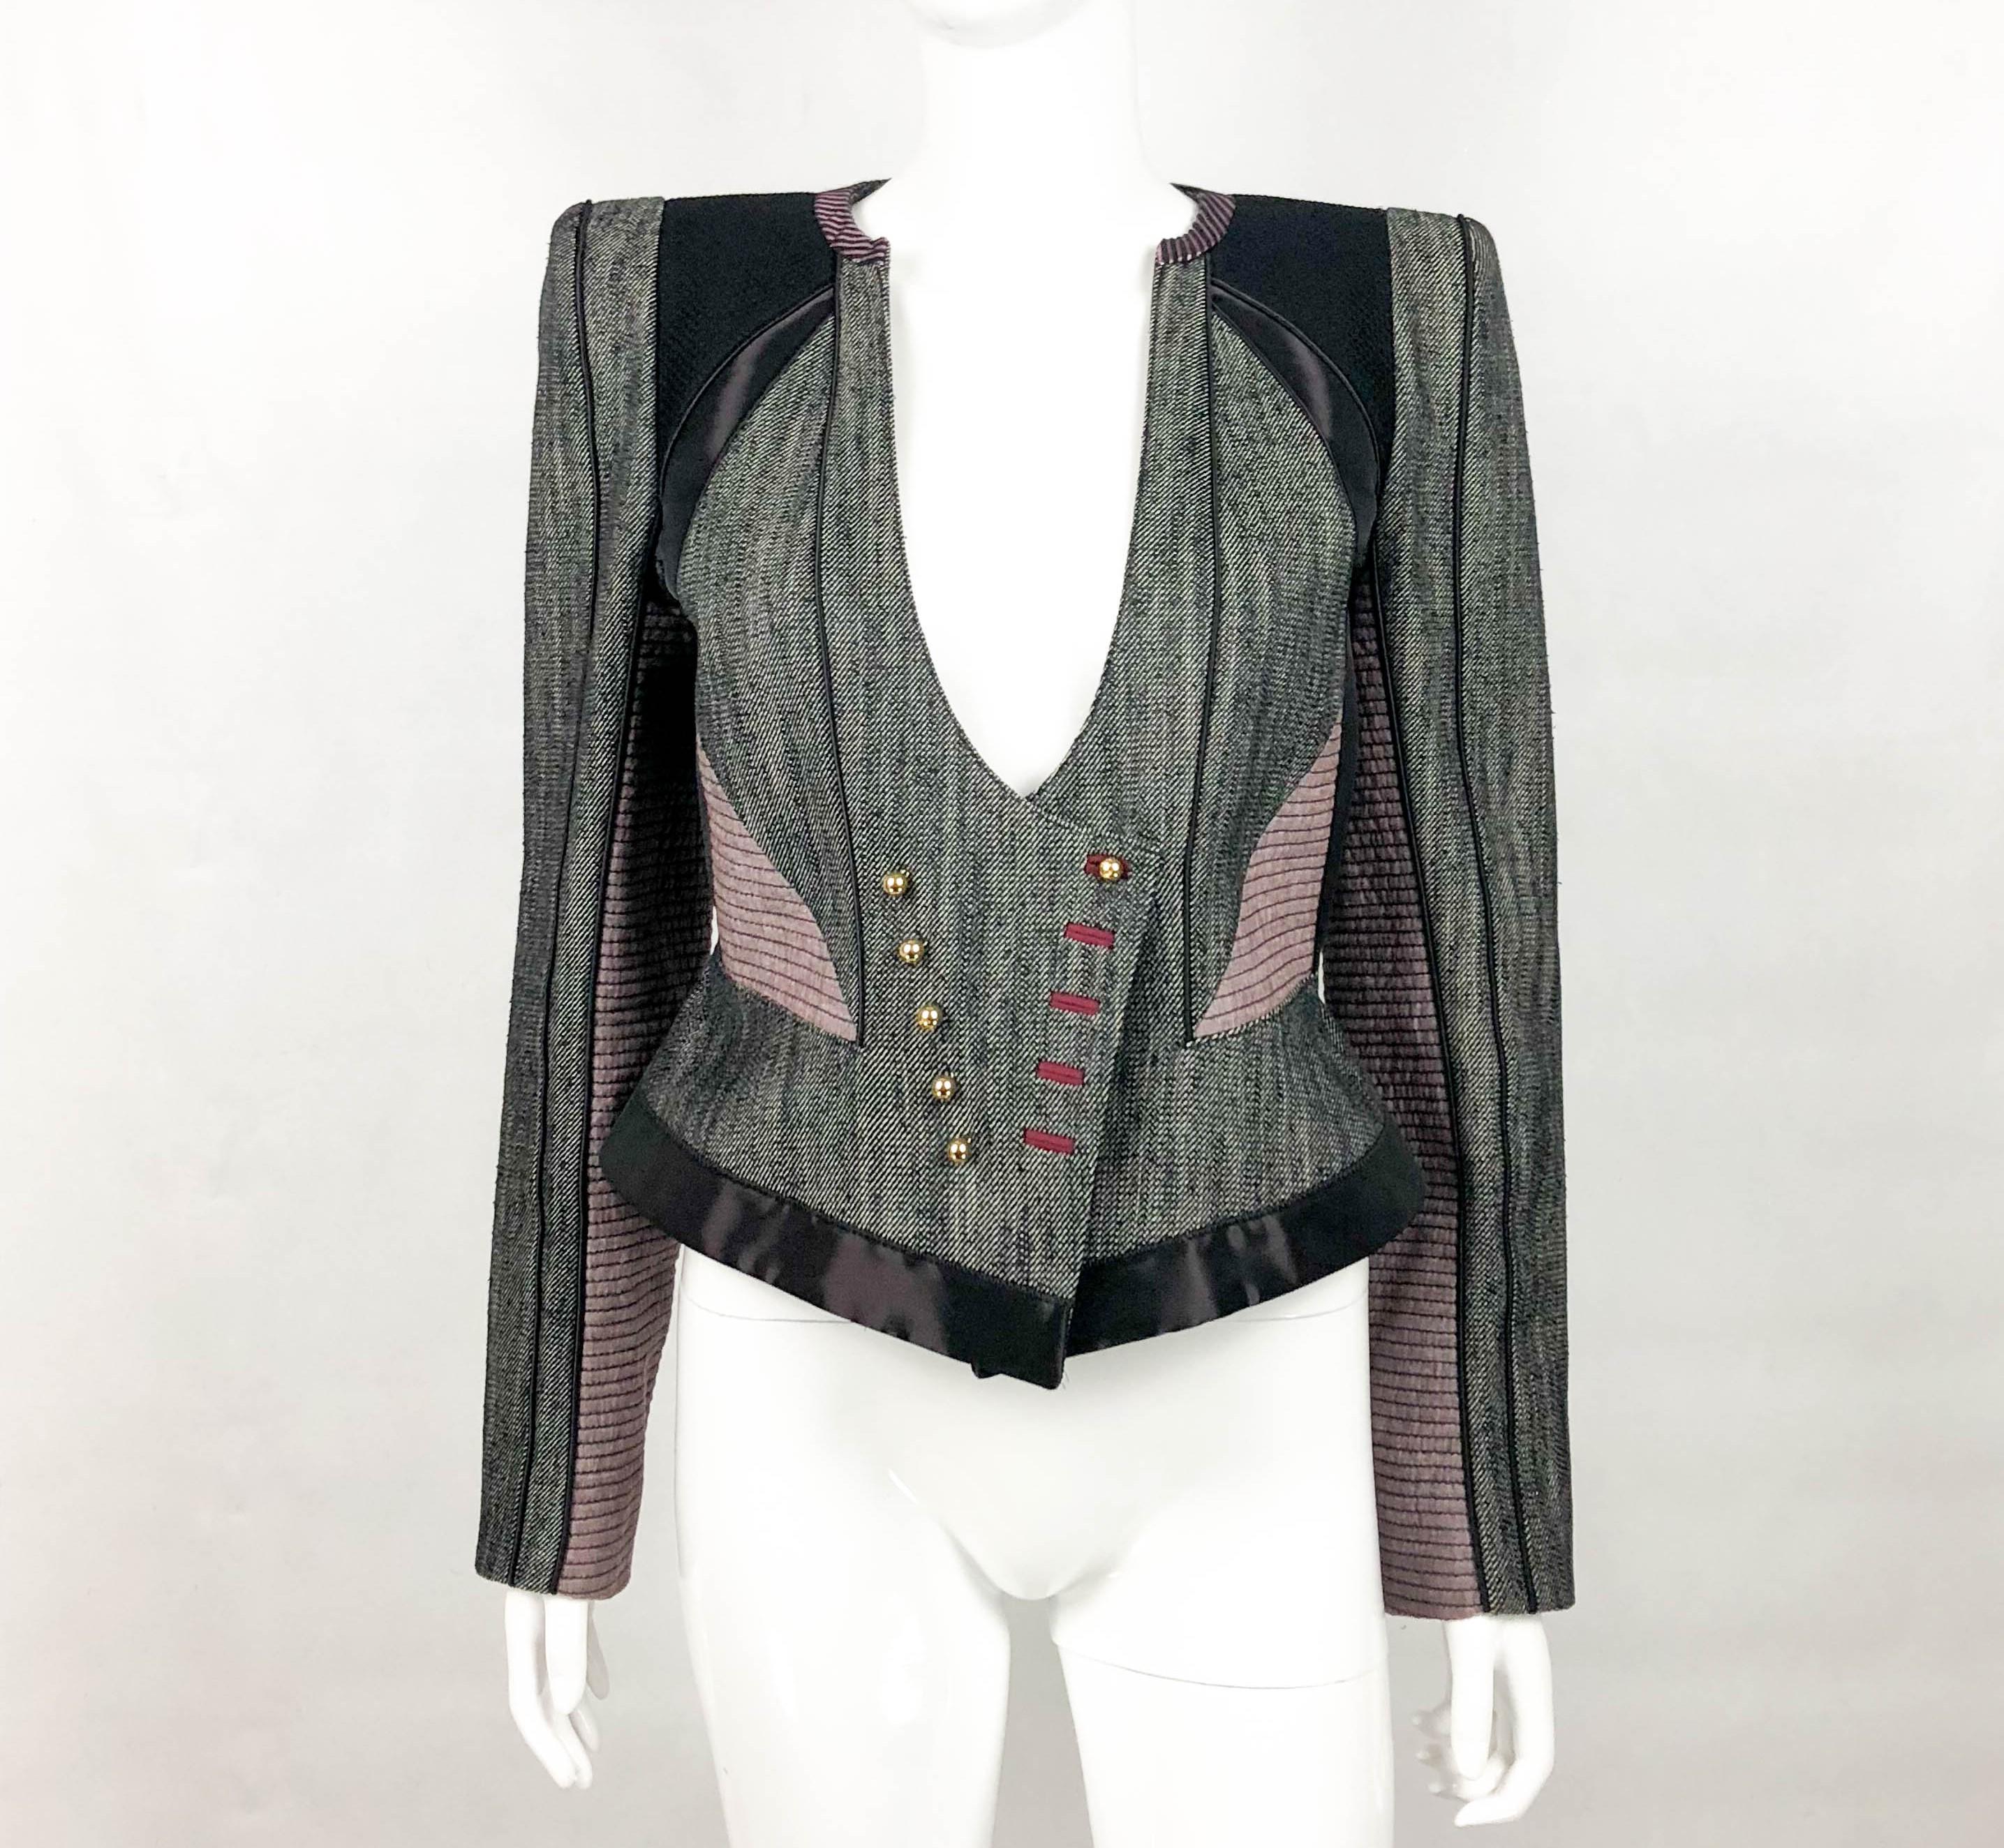 Louis Vuitton Futuristic Jacket. This striking jacket is from the Marc Jacobs’ era in Louis Vuitton. Of futuristic design, it made of panels of different textiles put together. The waist is accentuated, and the shoulders are structured. There are 10